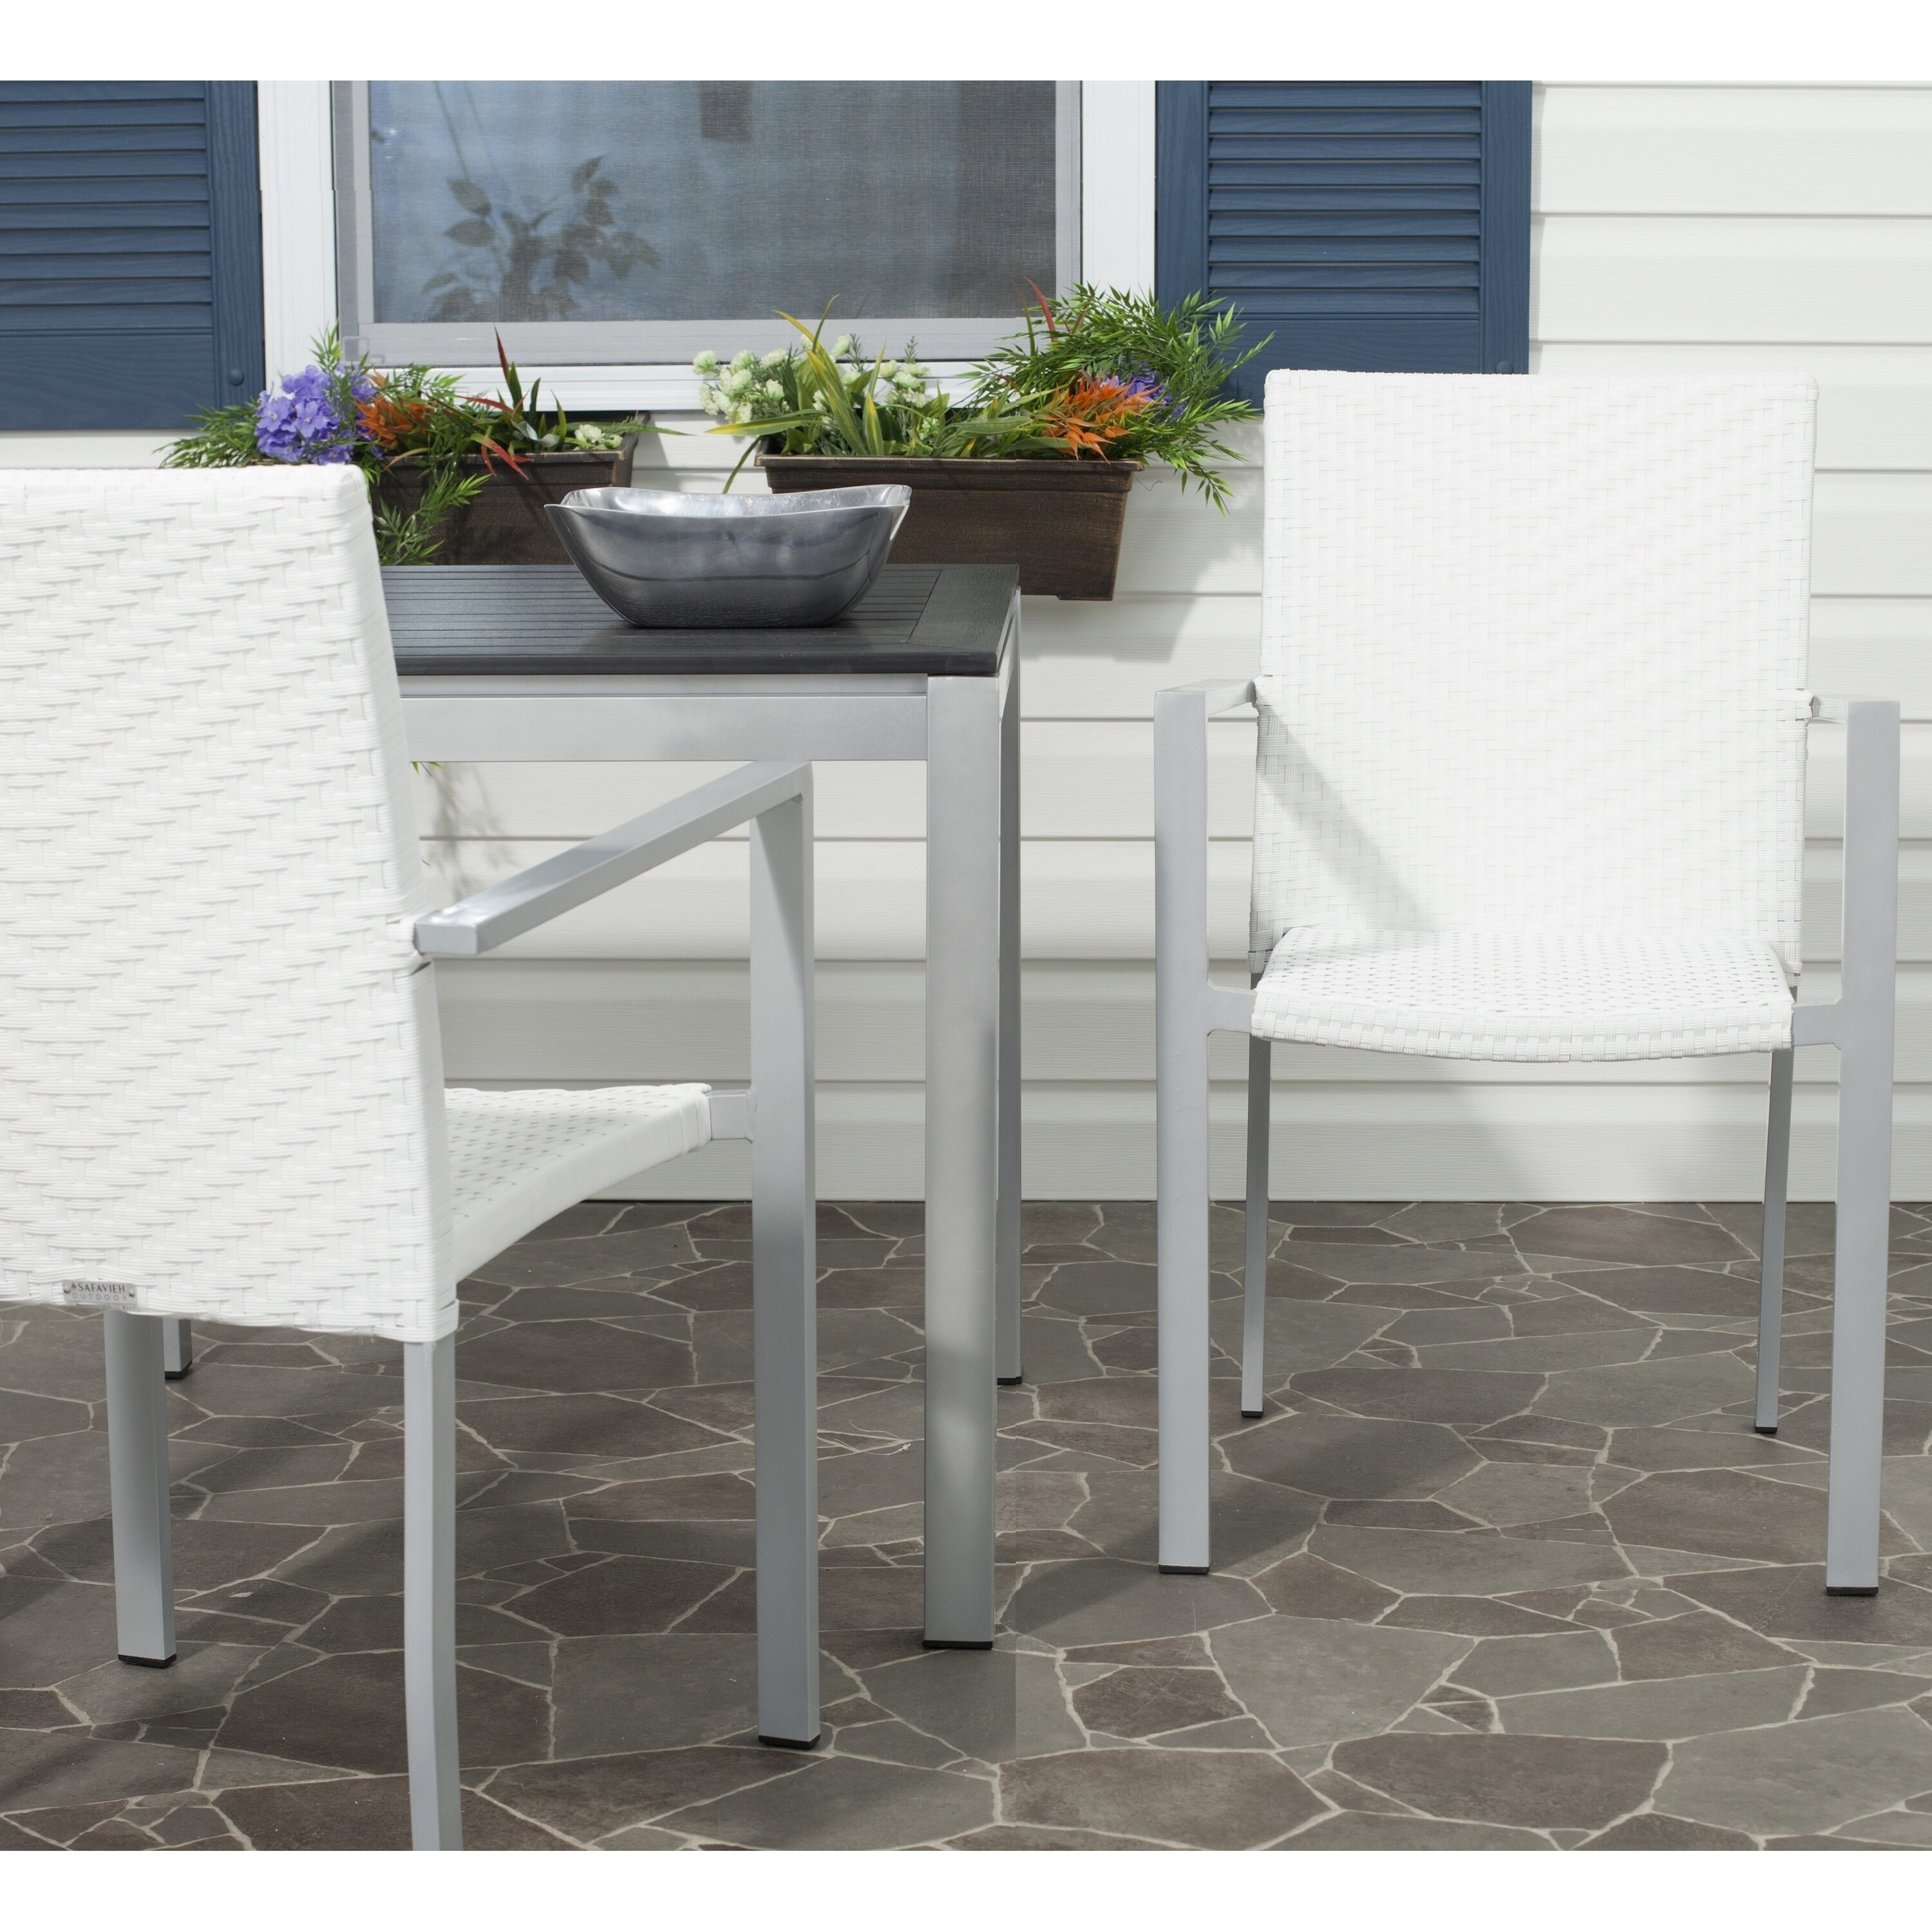 Cordova Off White Indoor Outdoor Stackable Arm Chair (set Of 2) (Off whiteIncludes Two (2) chairsMaterials PE wicker and aluminumSeat dimensions 18.5 inches width and 17.3 inches depthSeat height 17.7 inchesDimensions 35 inches high x 22 inches wide 